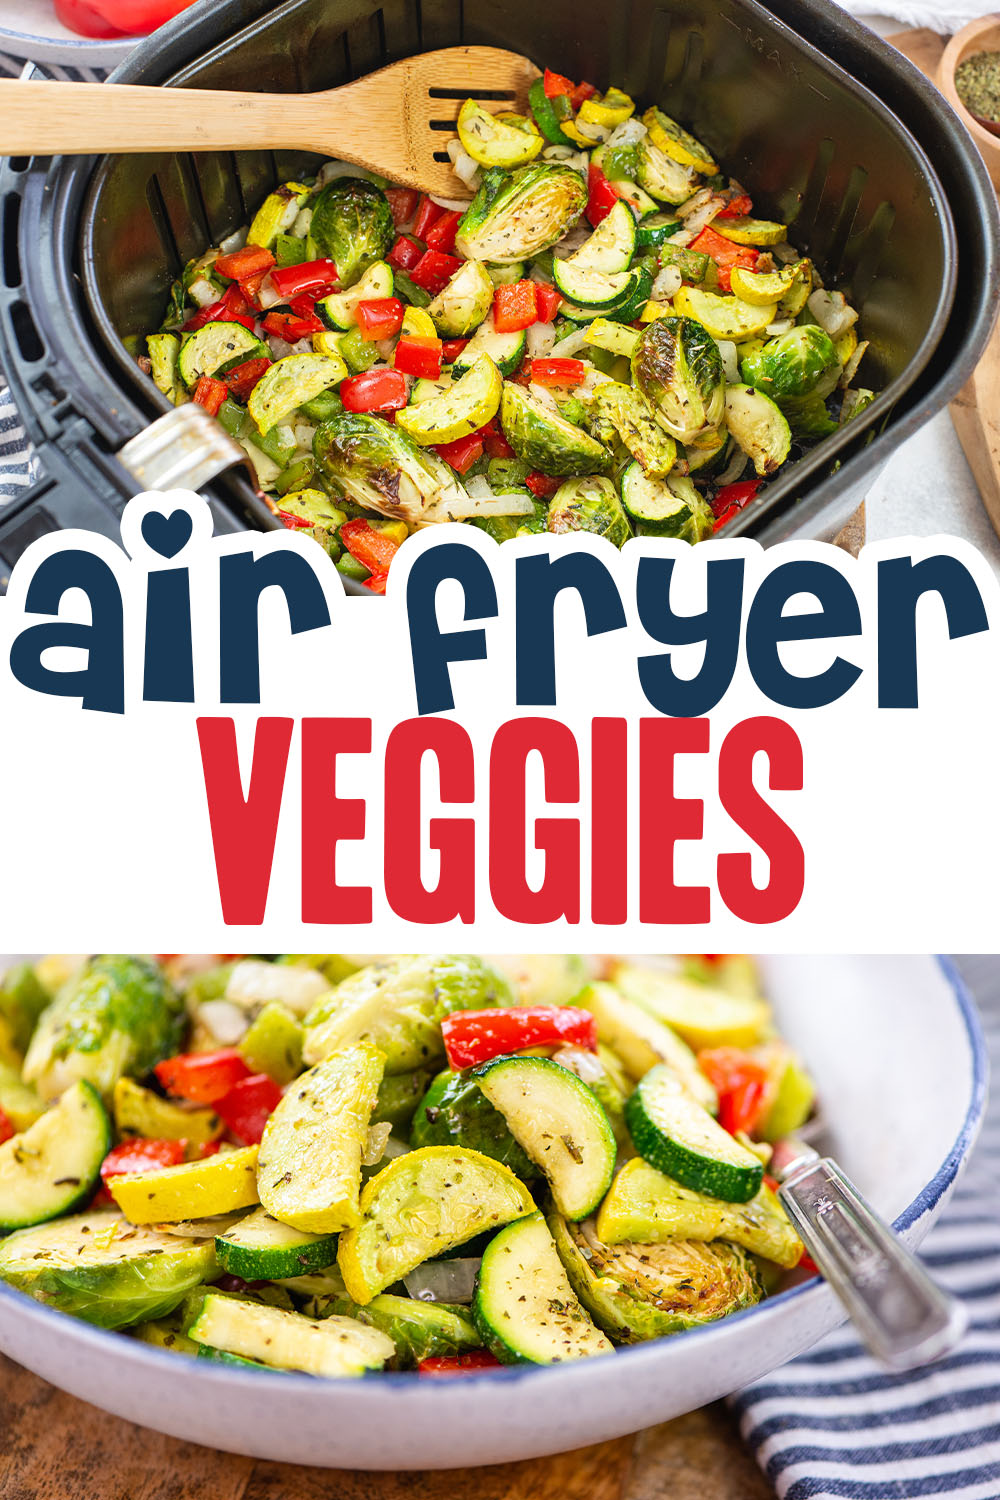 You will love vegetables cooked in the air fryer.  We season them with light Italian seasoning and cook them all together at once!